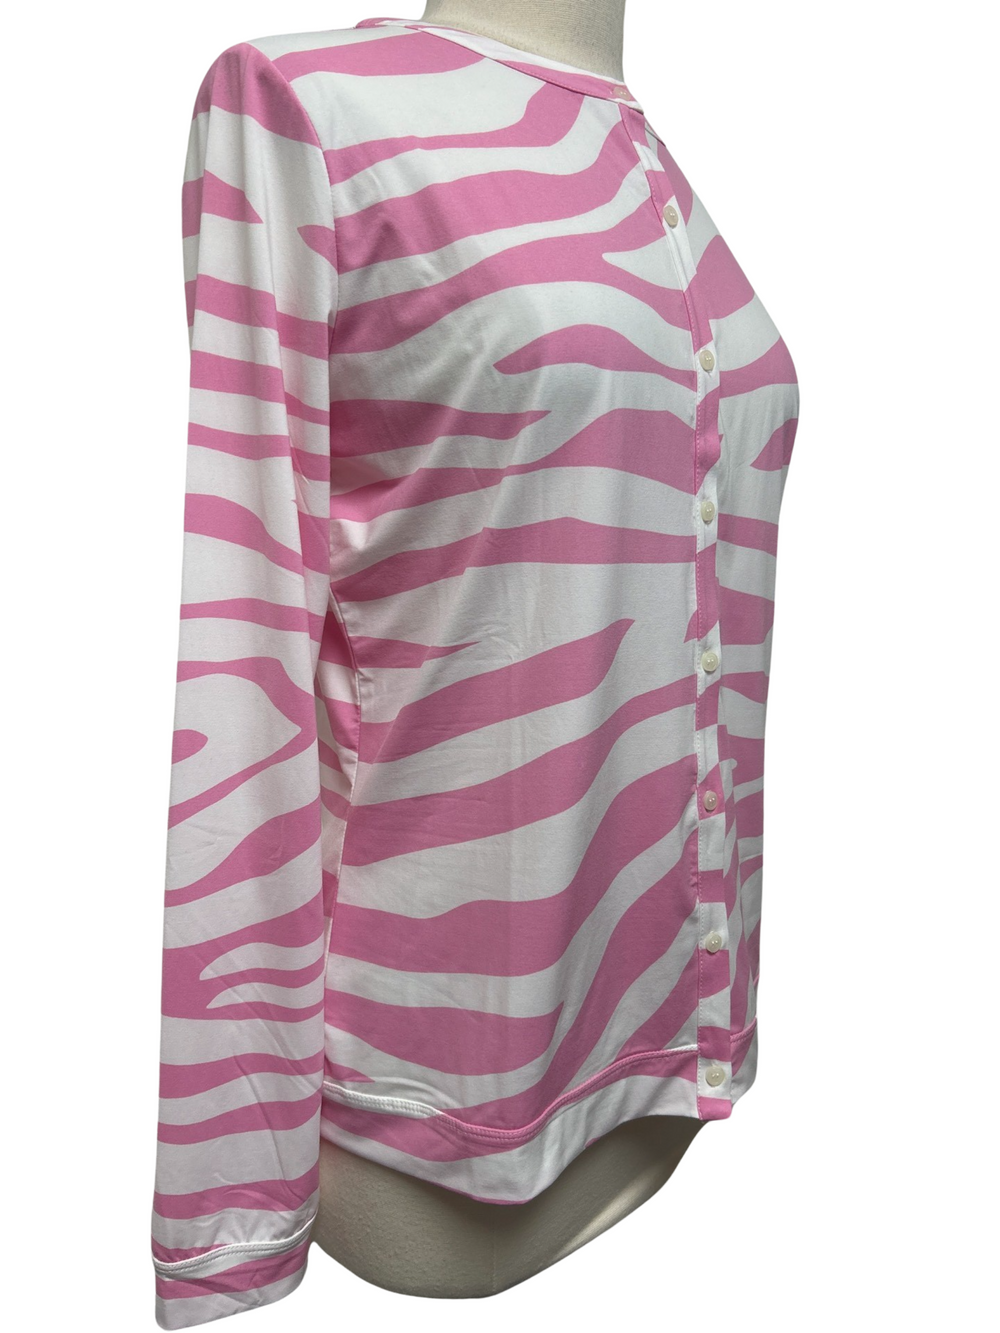 OTG - Long Sleeve Top - Pink and White - L - Skorzie